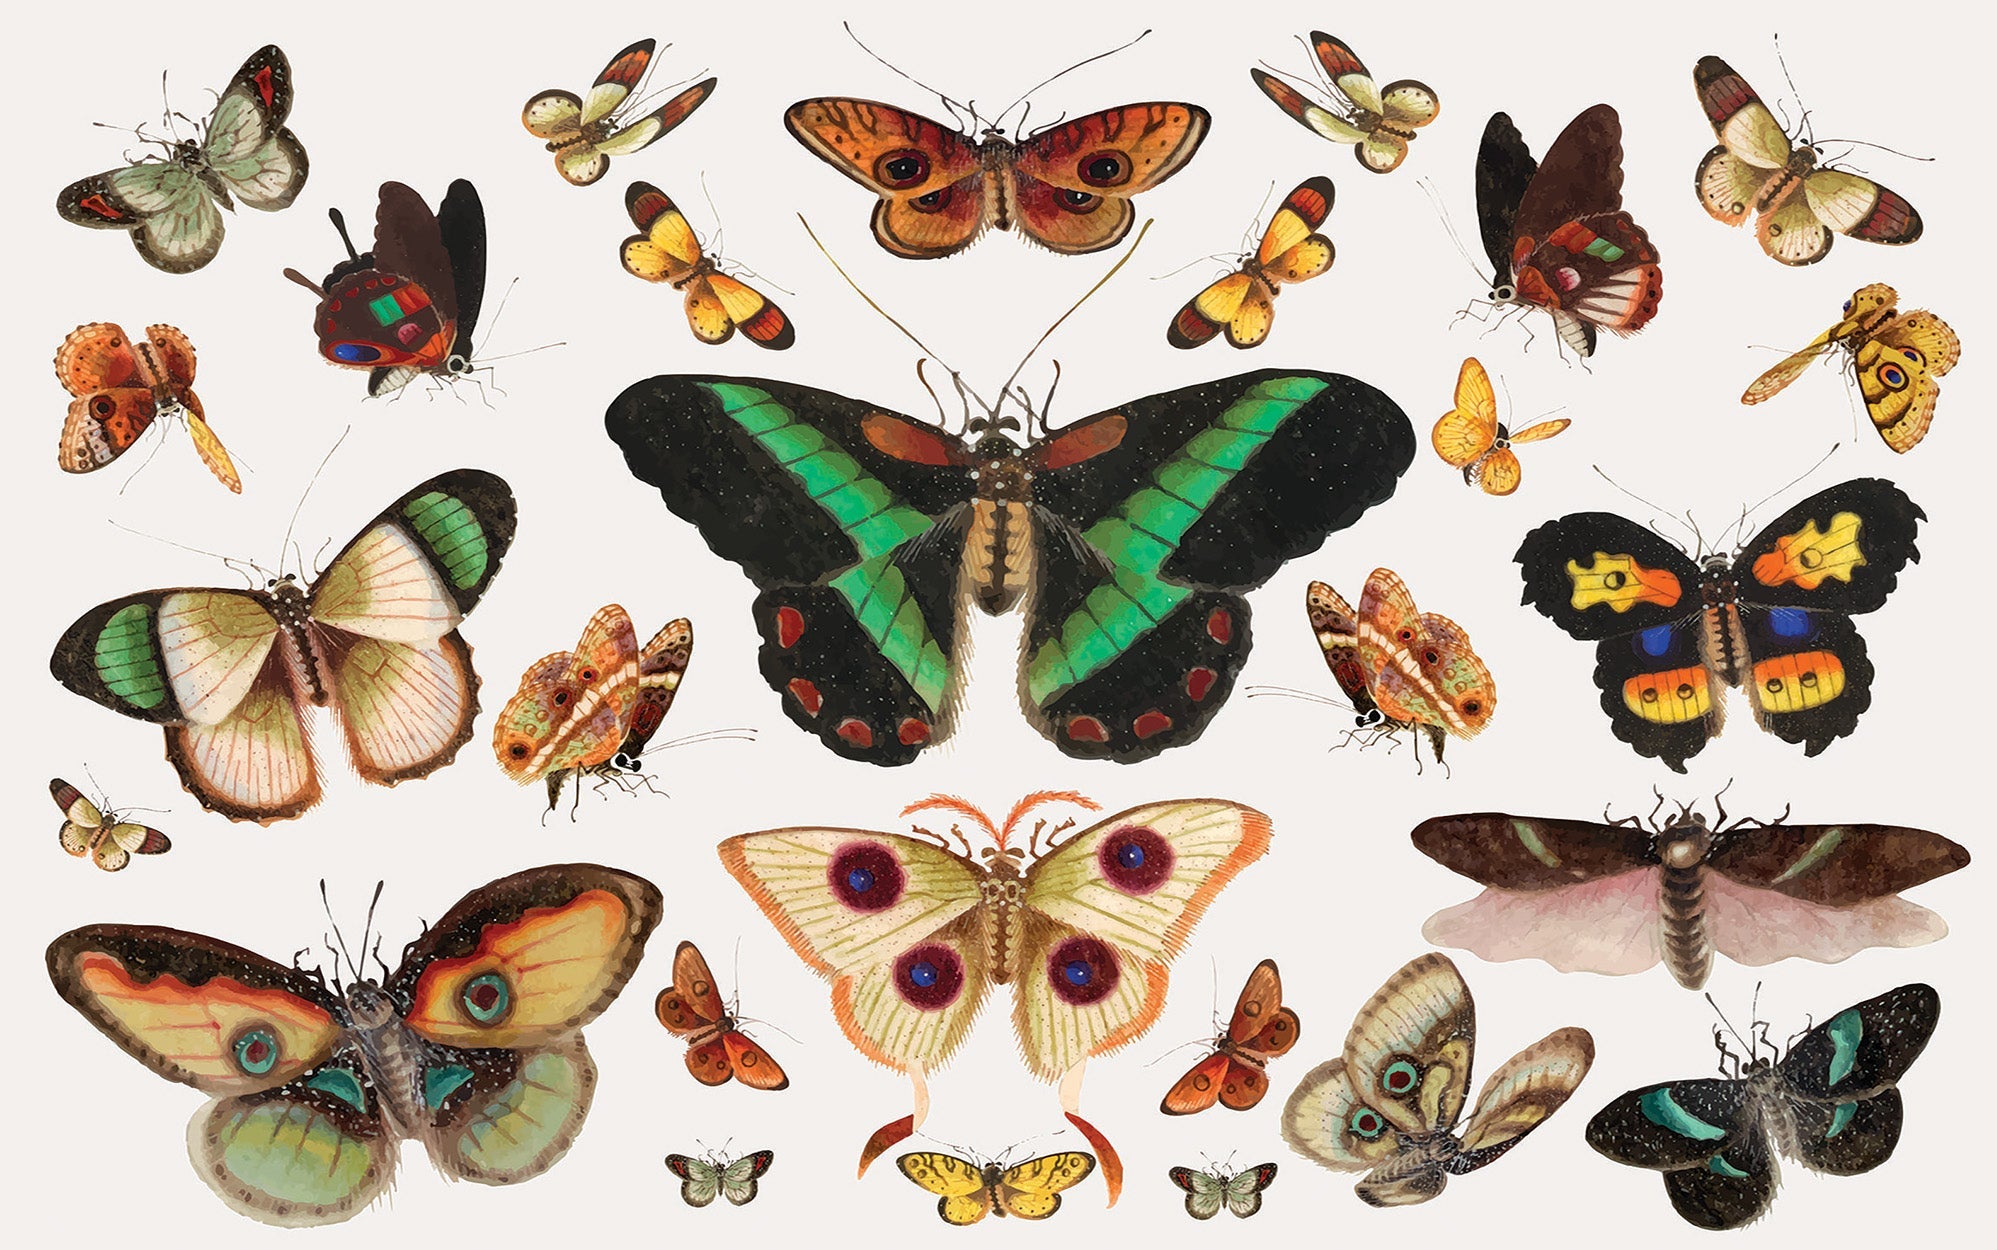 A variety of beautifully illustrated vintage butterflies displayed on a wall mural.